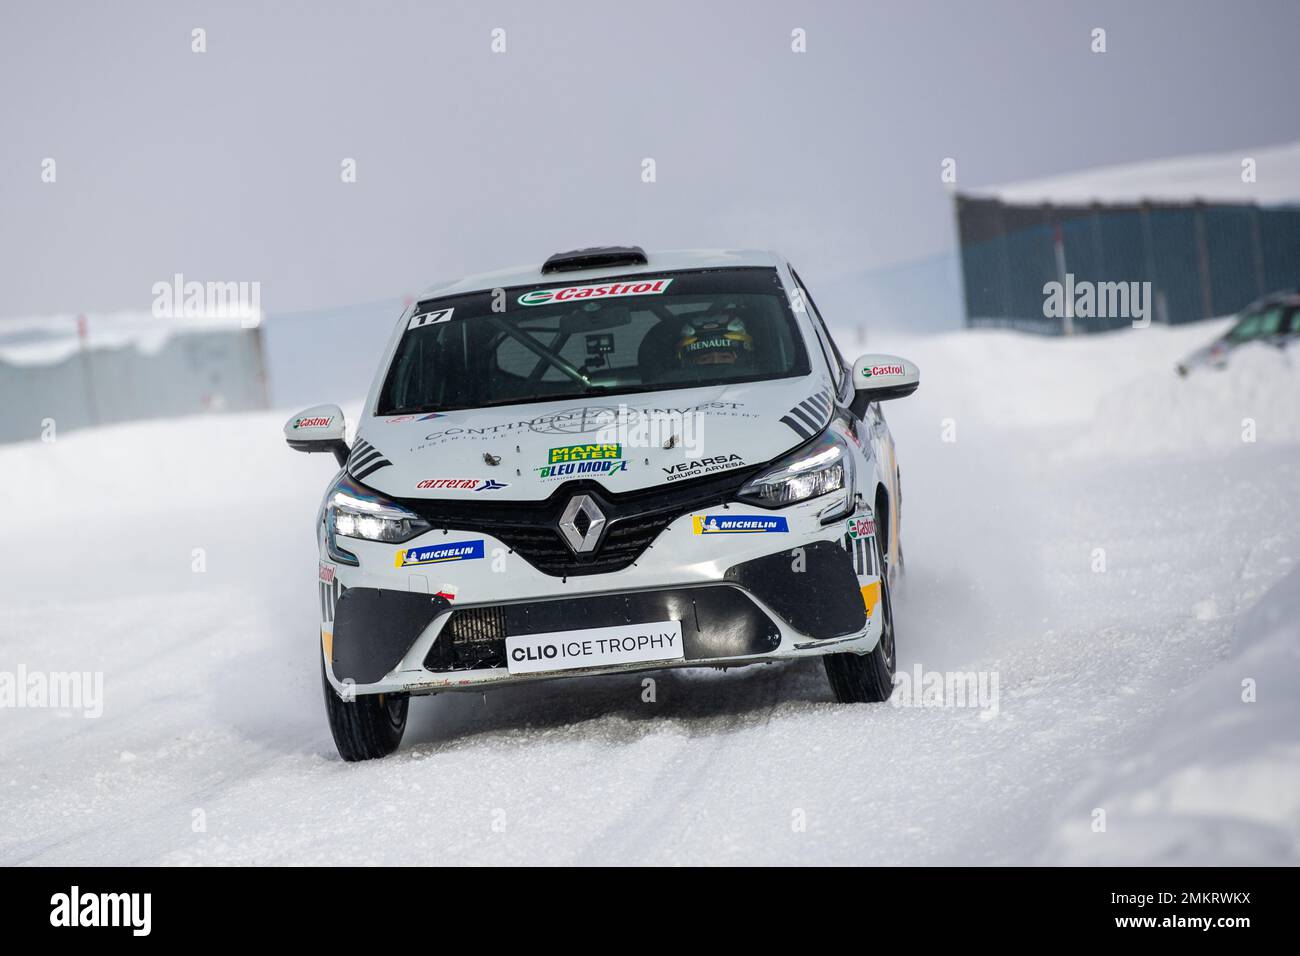 17A Mathieu LANNEPOUDENX (FR), BRUNET COMPETITION, action 17B Joaquin RODRIGO (ES), BRUNET COMPETITION, action during the 2023 Clio Ice Trophy 2023 - GSeries G2 on the Circuit Andorra - Pas de la Casa, on January 28, 2023 in Encamp, Andorra - Picture Damien Doumergue / DPPI Stock Photo